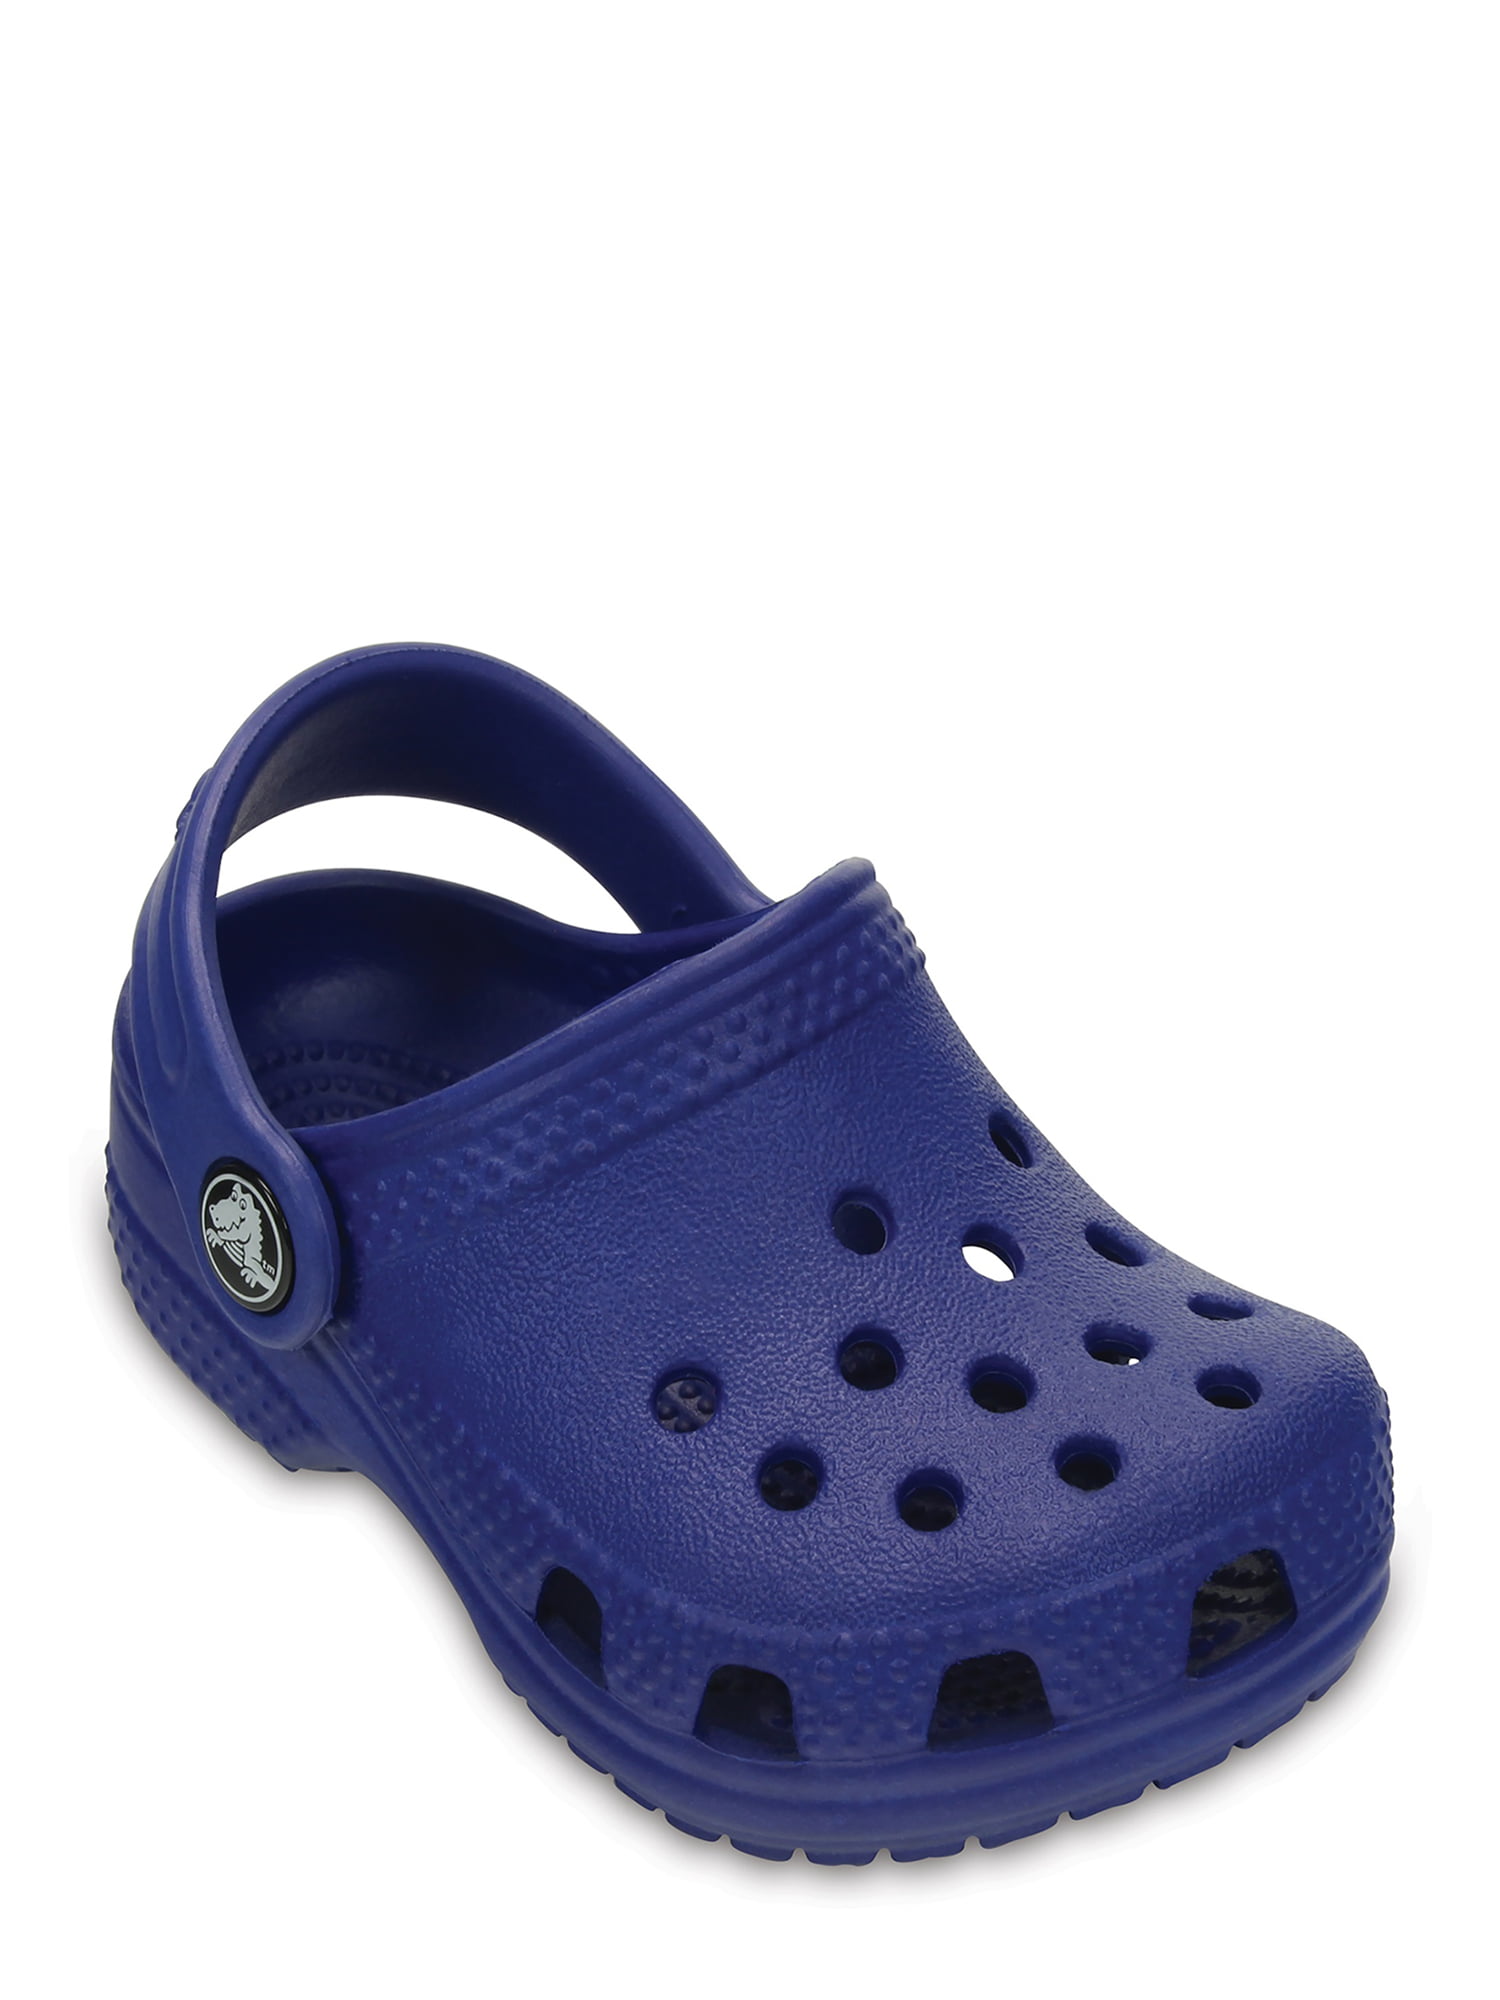 cheapest place to get crocs